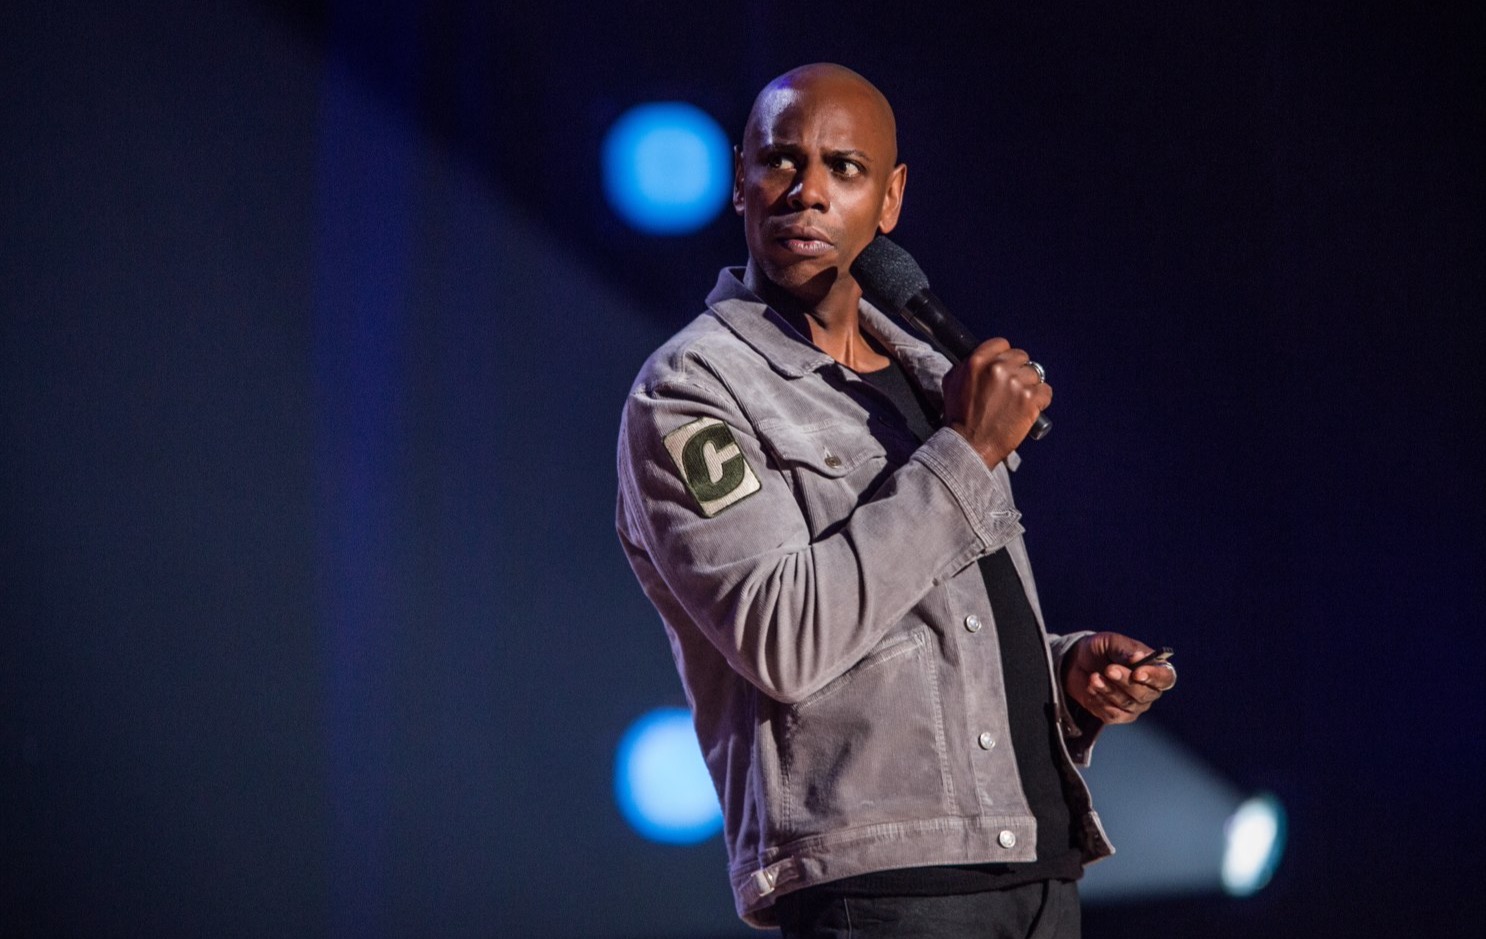 Dave Chappelle doing stand up comedy